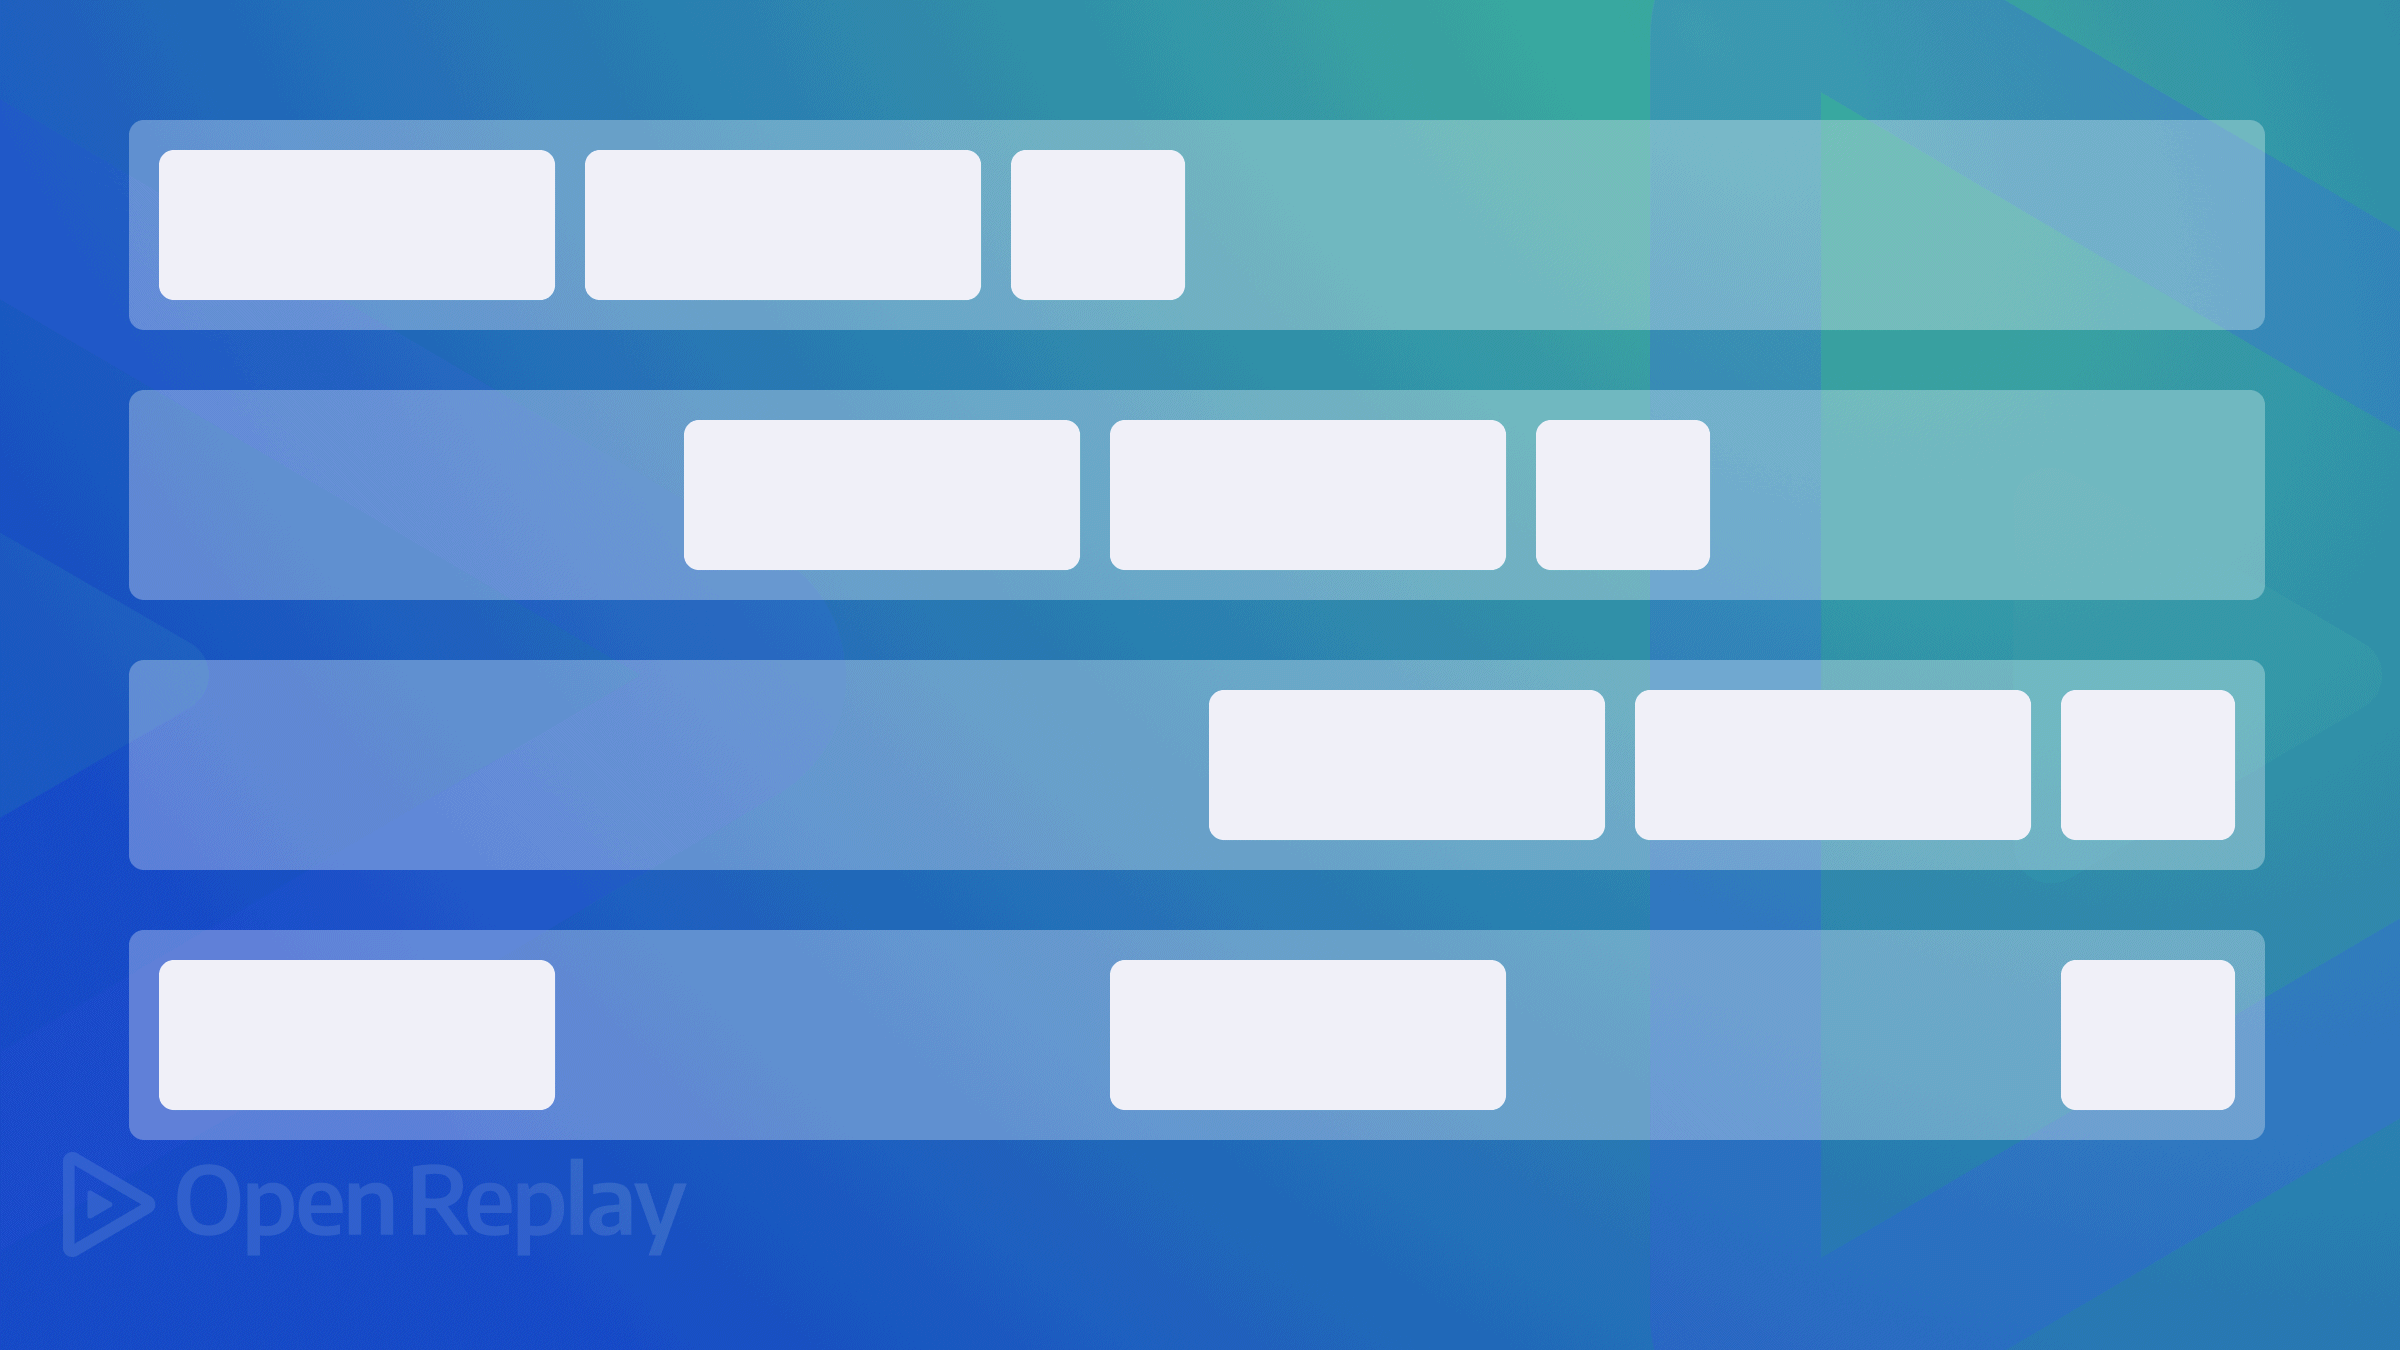 Building Layouts with CSS3 Flexbox